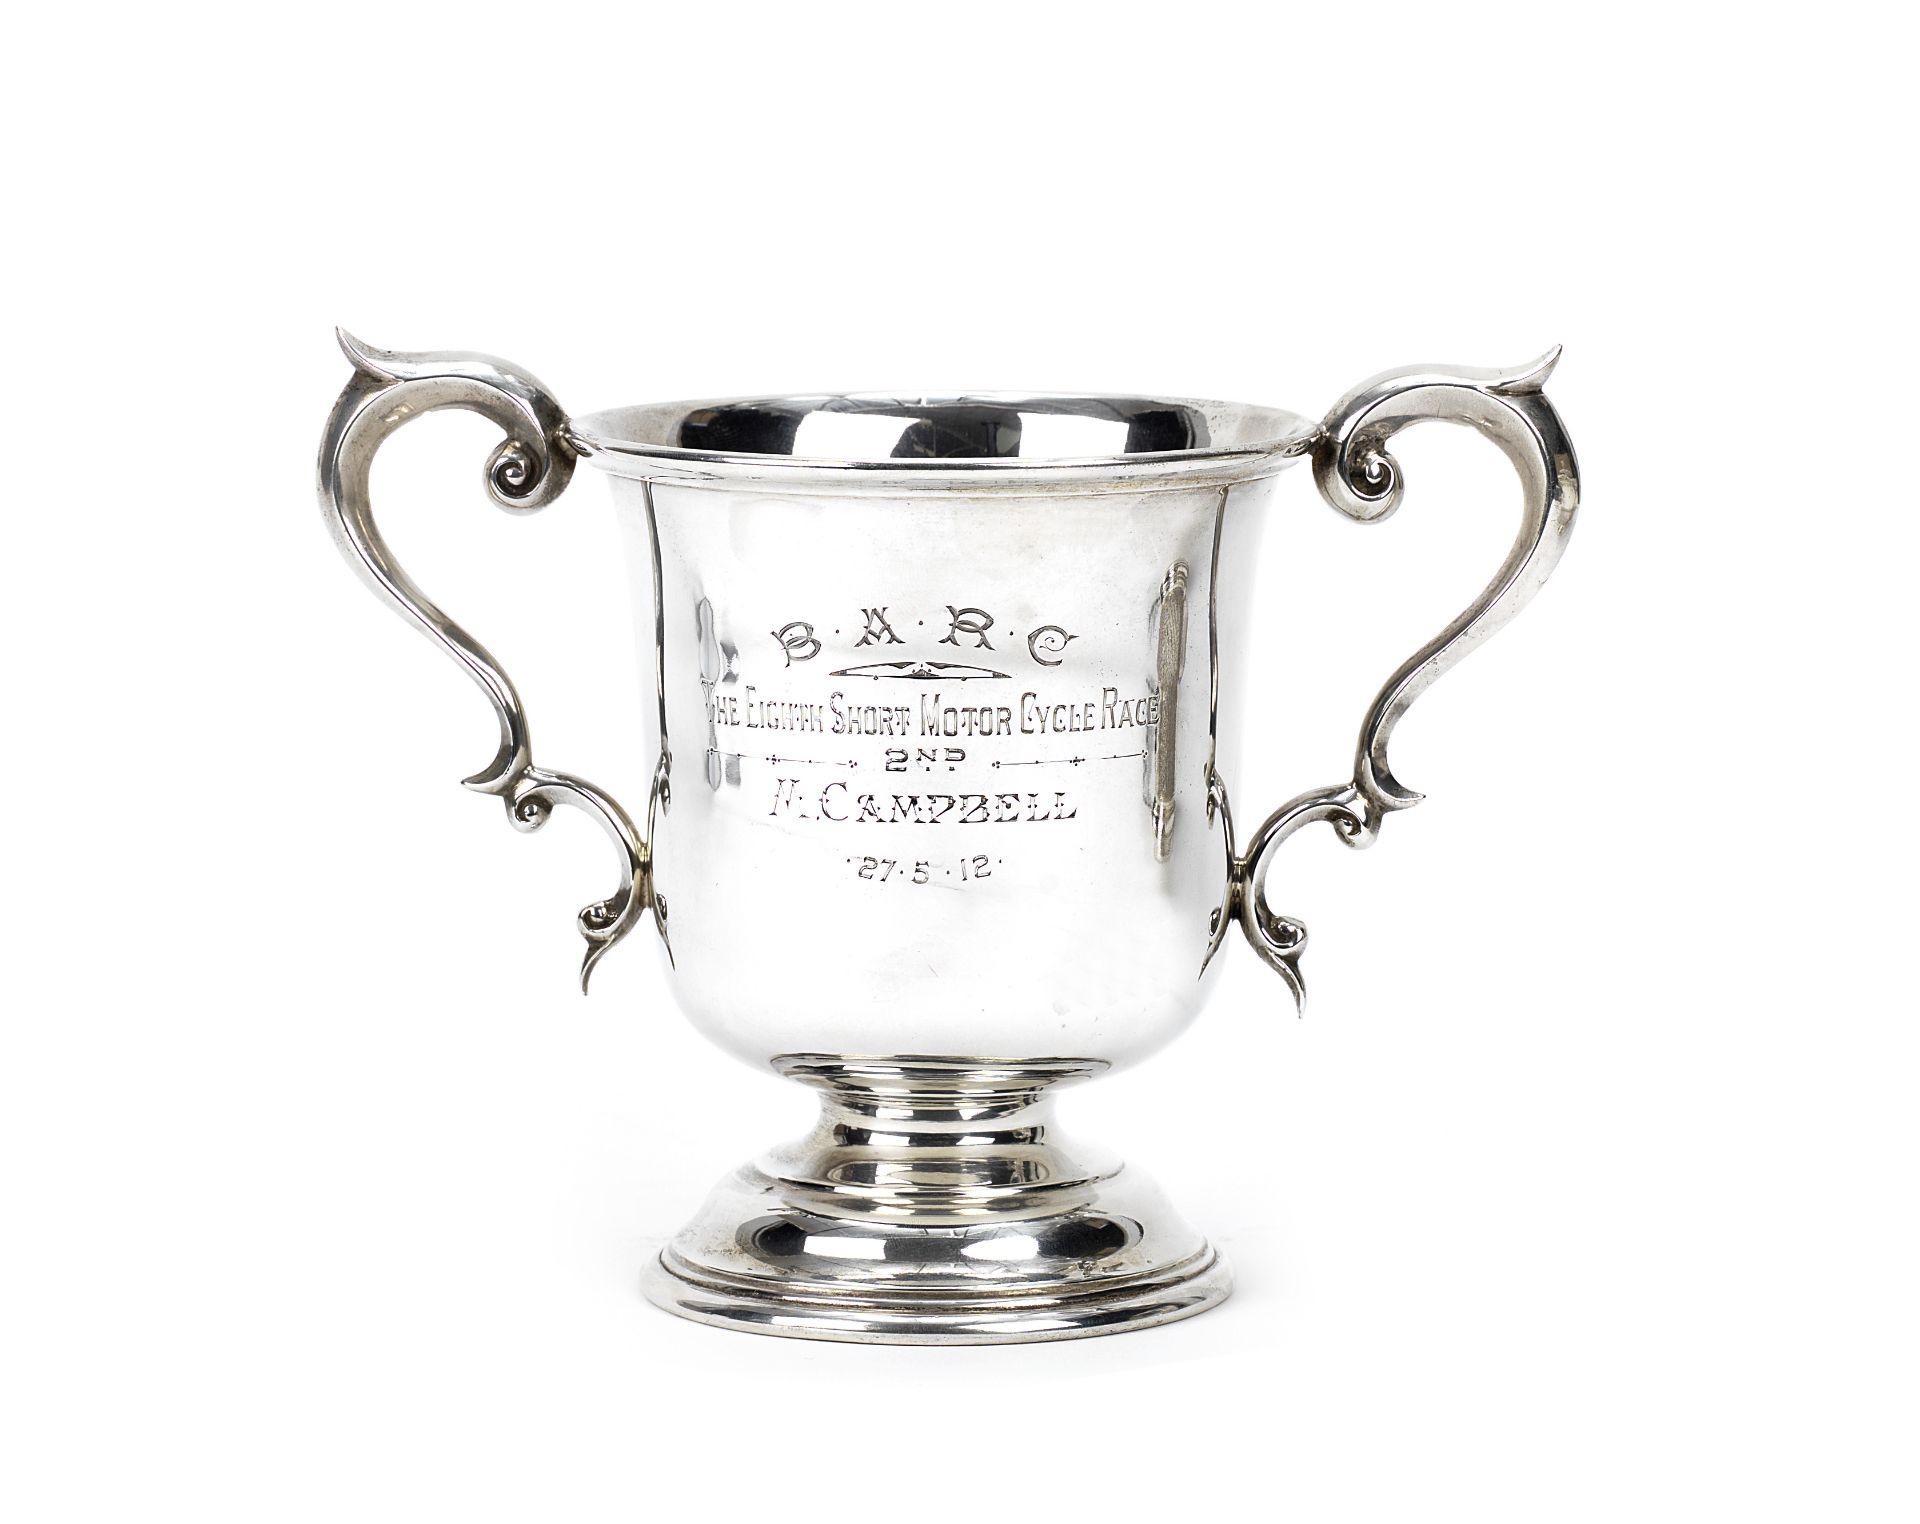 A 1912 BARC Eighth Short Motor Cycle Race 2nd place sterling silver trophy, awarded to Malcolm Ca...